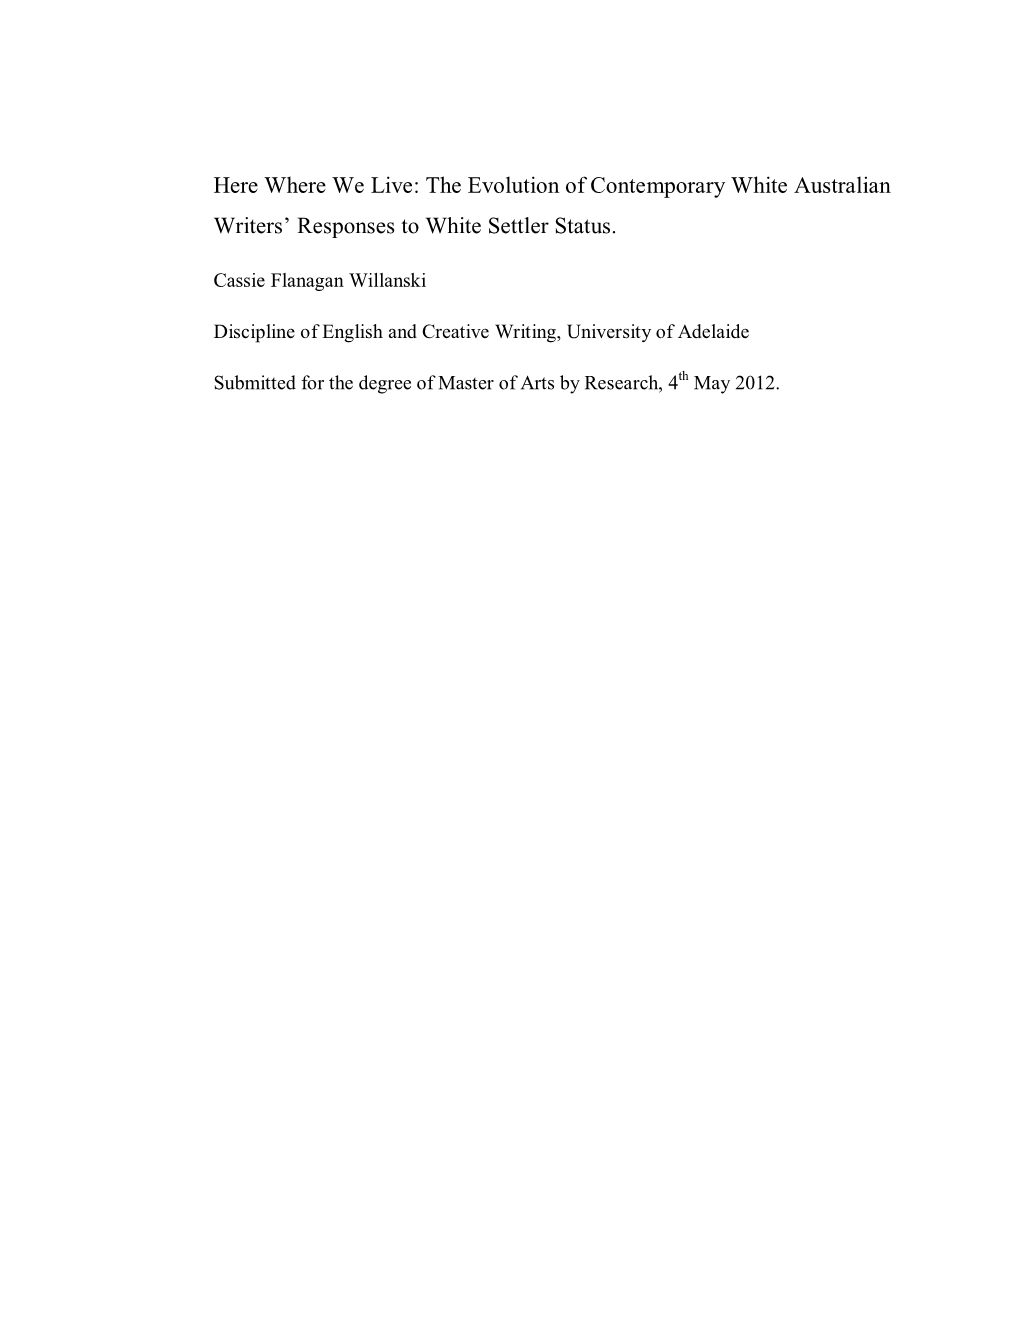 The Evolution of Contemporary White Australian Writers' Responses To